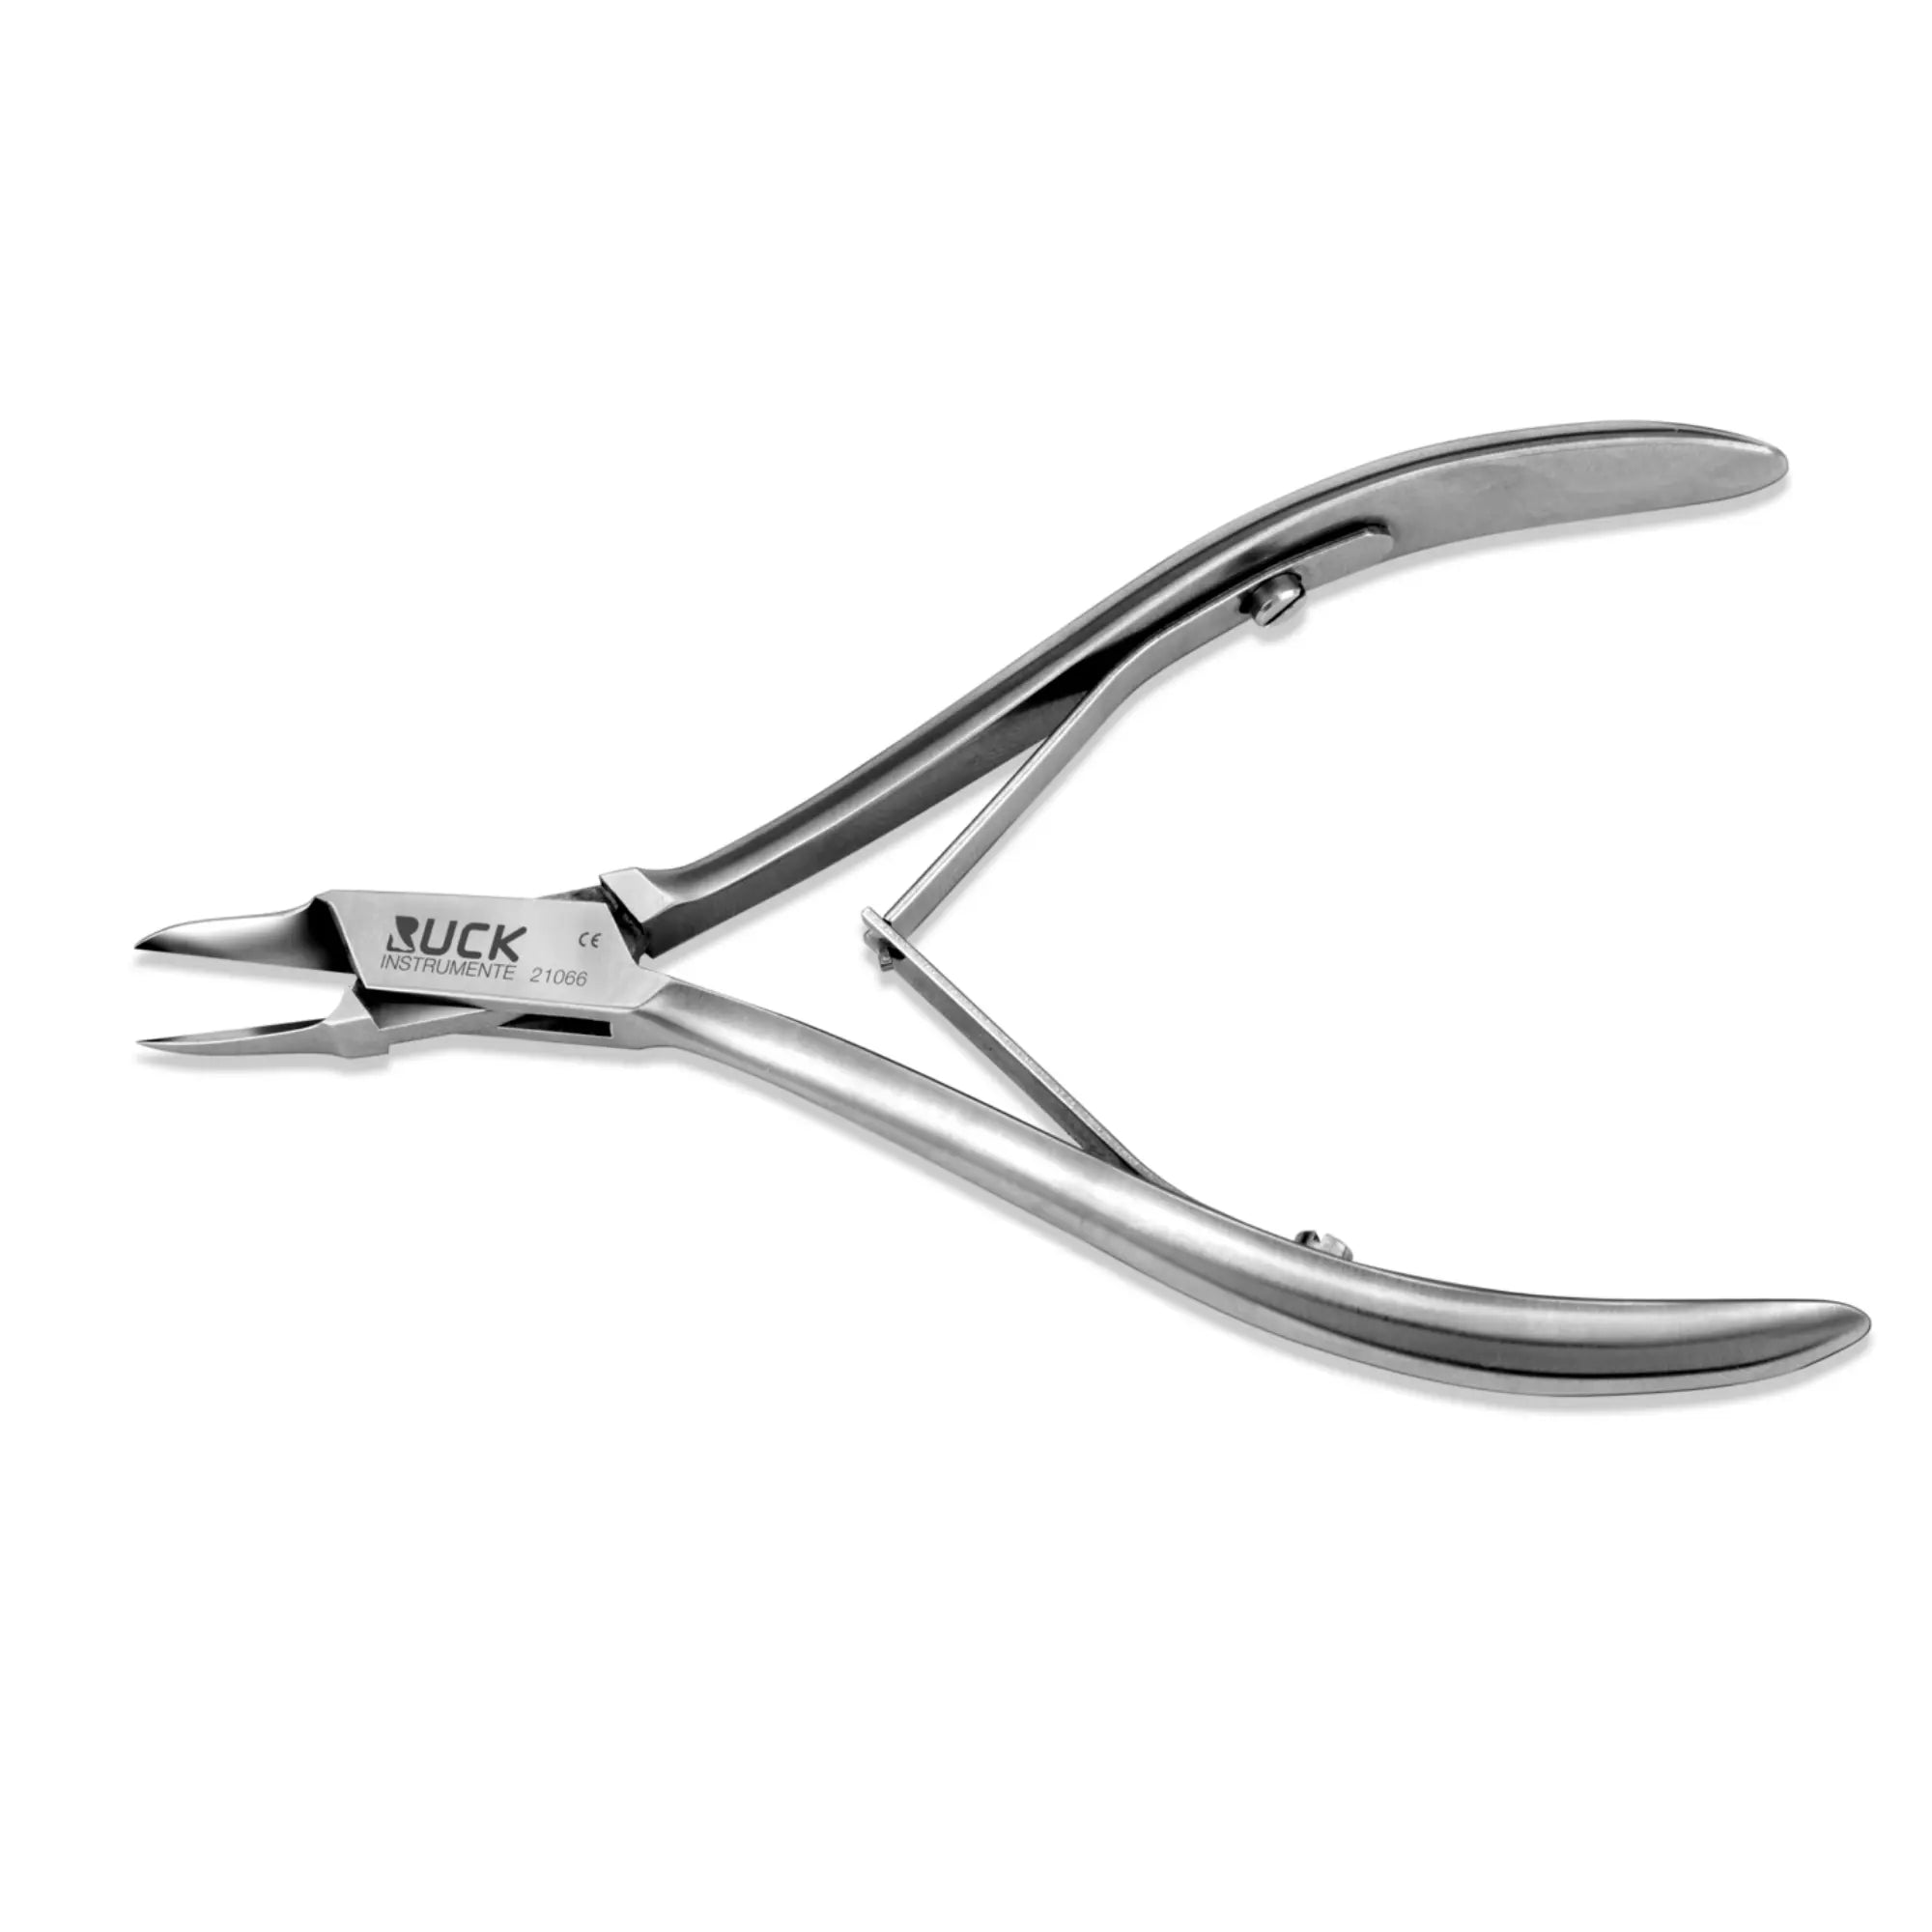 Pince à ongles - Coupe droite 14 mm - Mors plats - 11,5 cm - Ruck Ruck